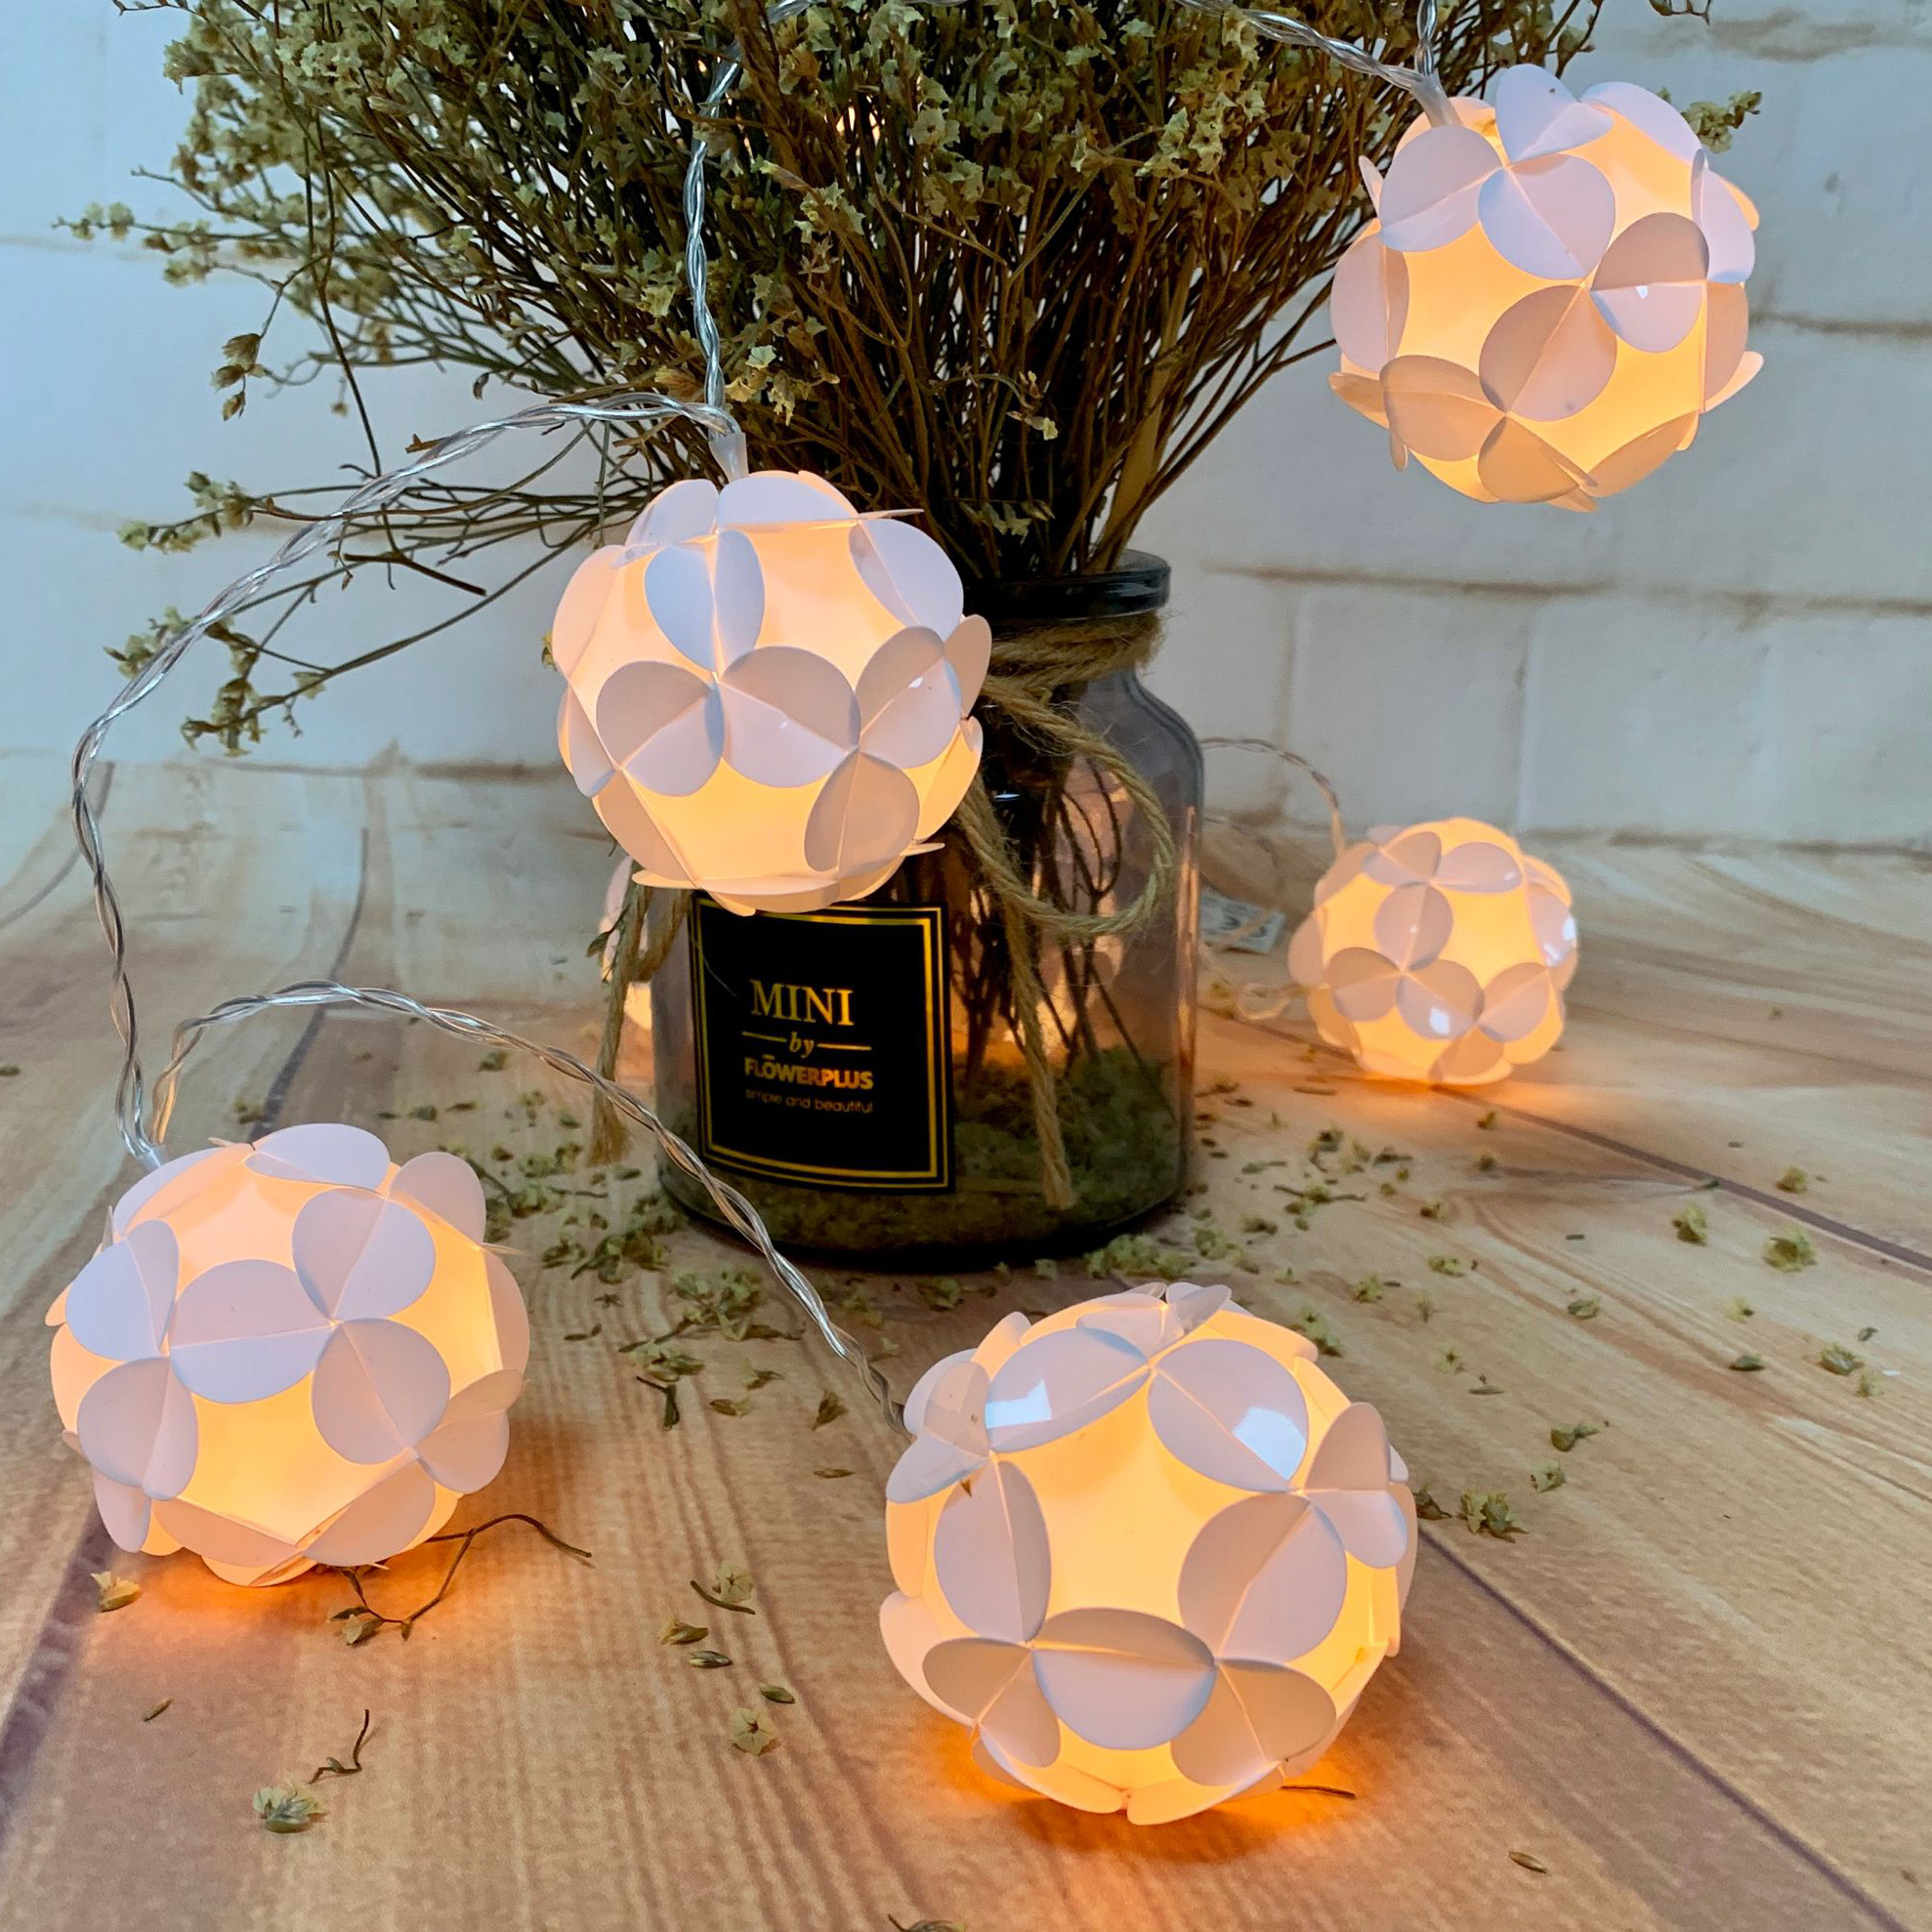 10L fairy light with pvc flower ball( dia. 6cm), indoor &outdoor use